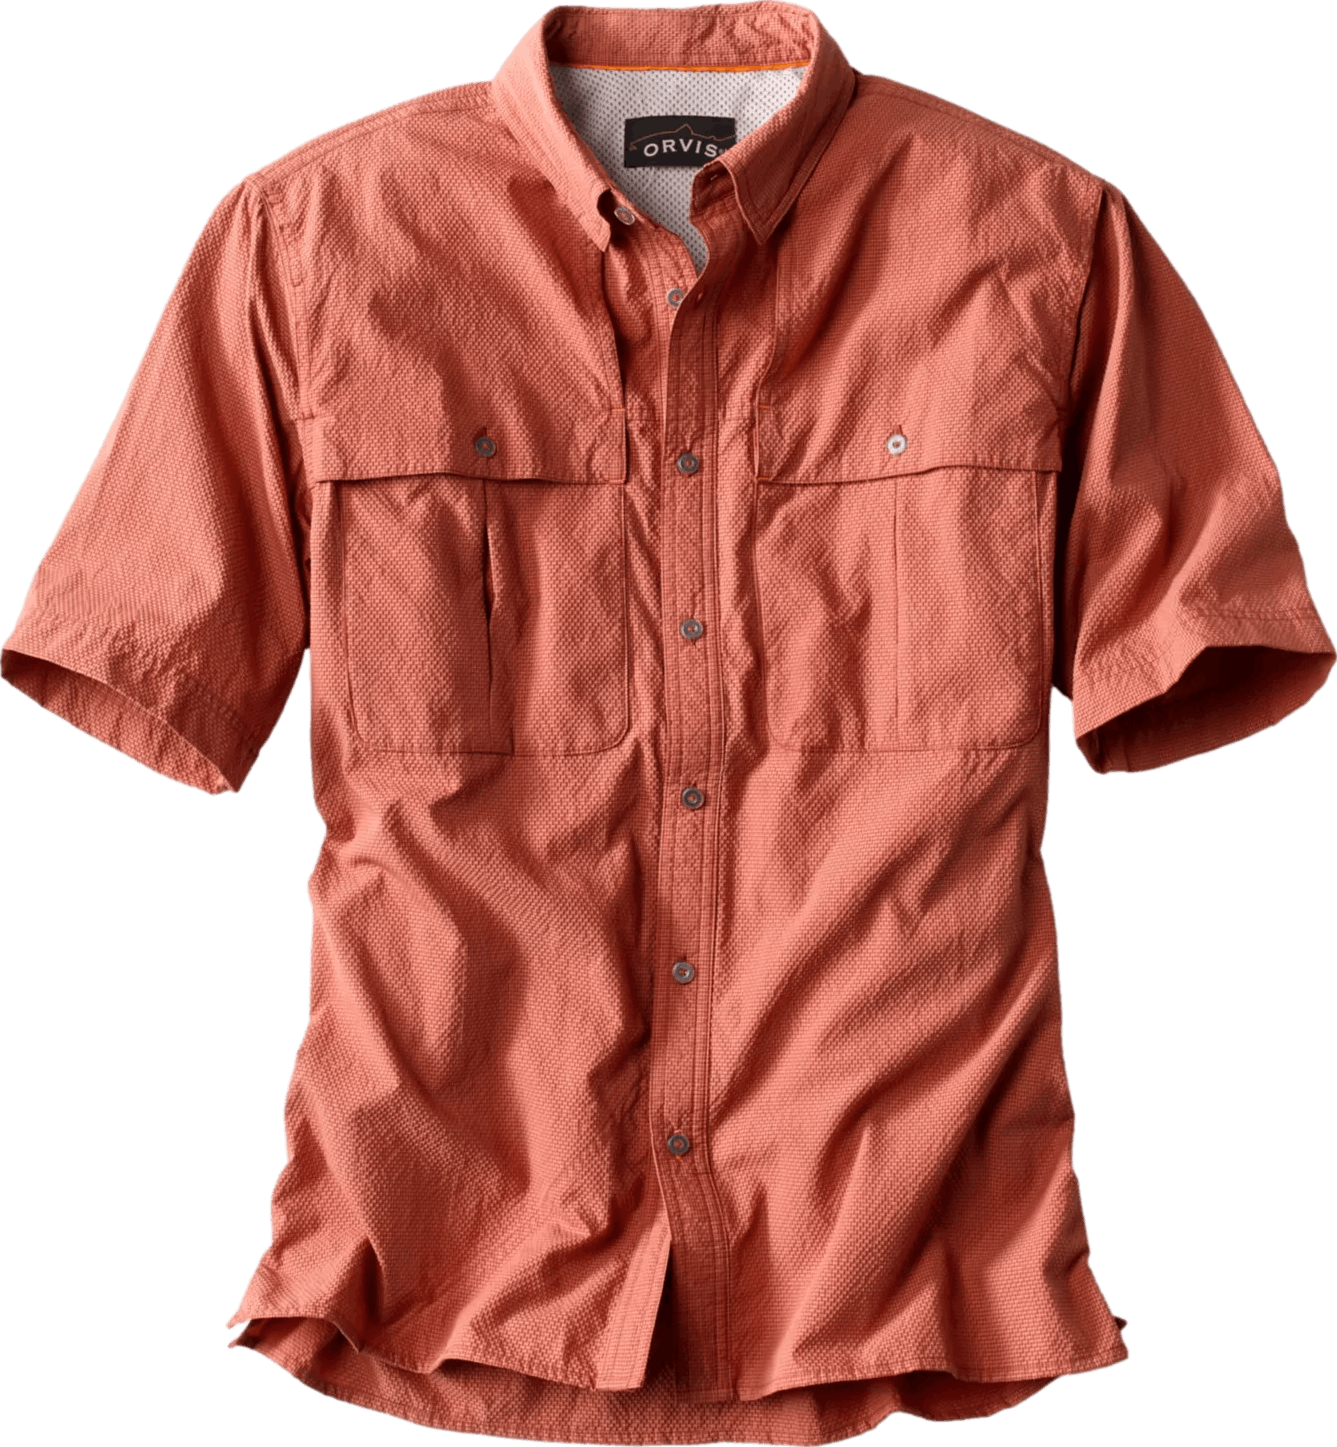 Orvis drirelease Casting Tee: The most incredible and comfortable